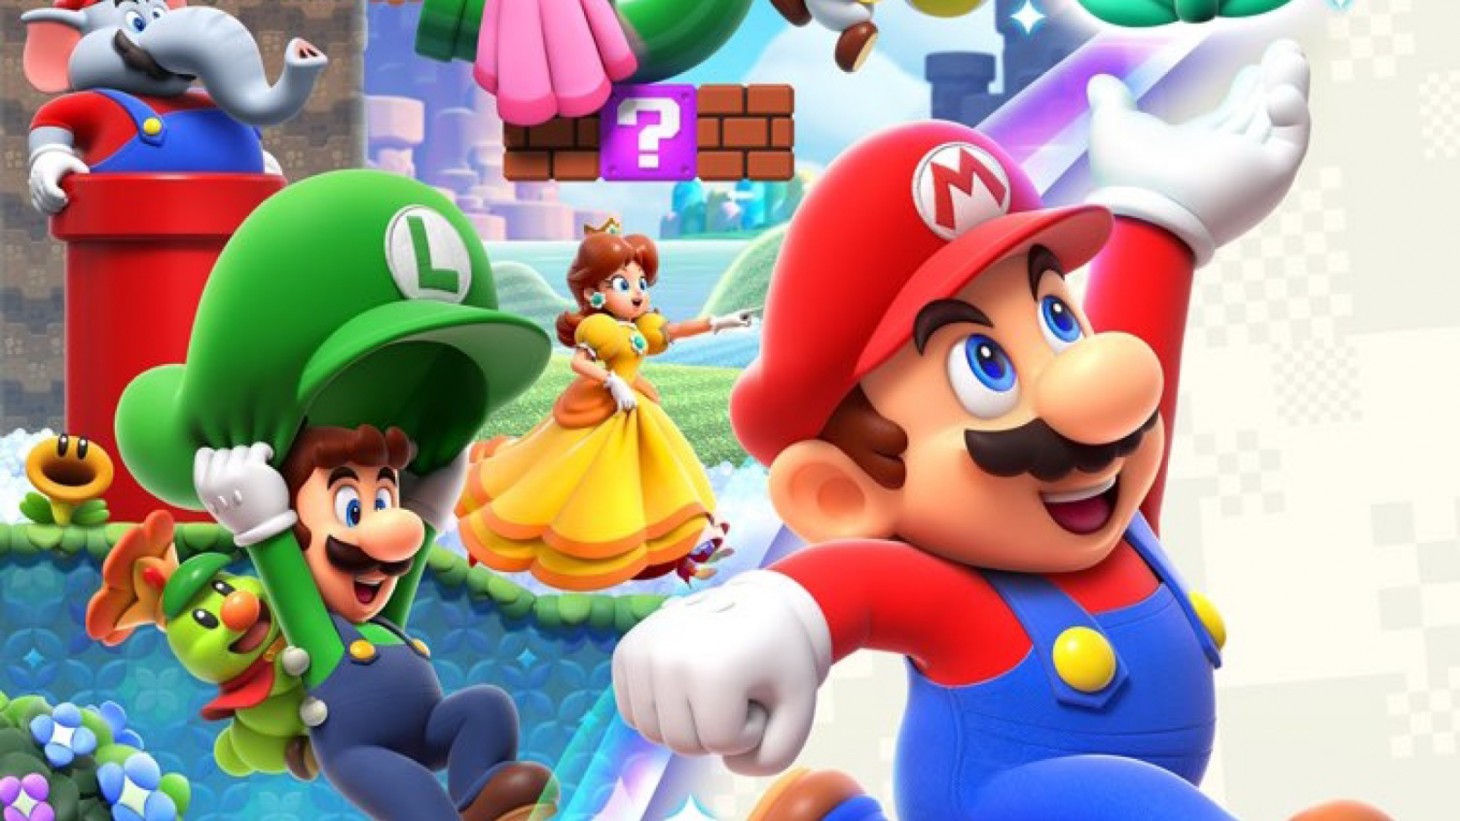 How Super Mario Wonder Hints at Switch 2! 